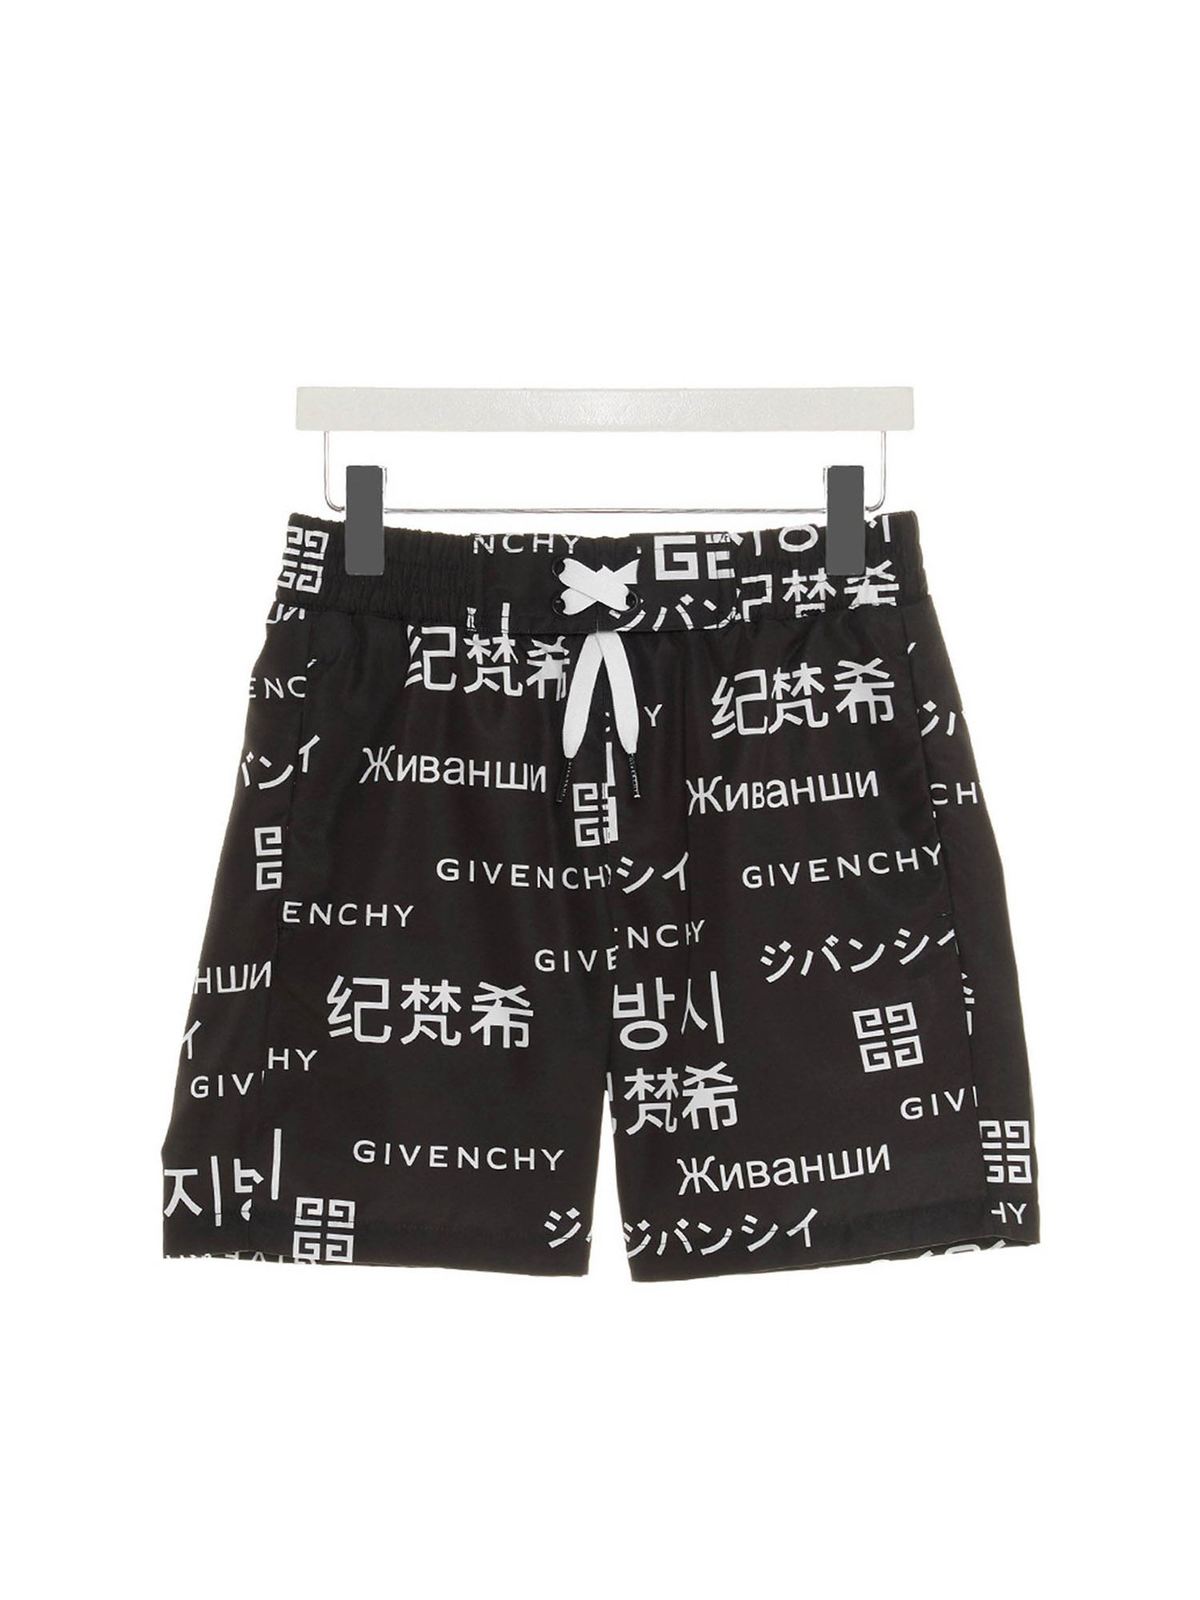 GIVENCHY SURFER SWIMMING TRUNKS IN BLACK